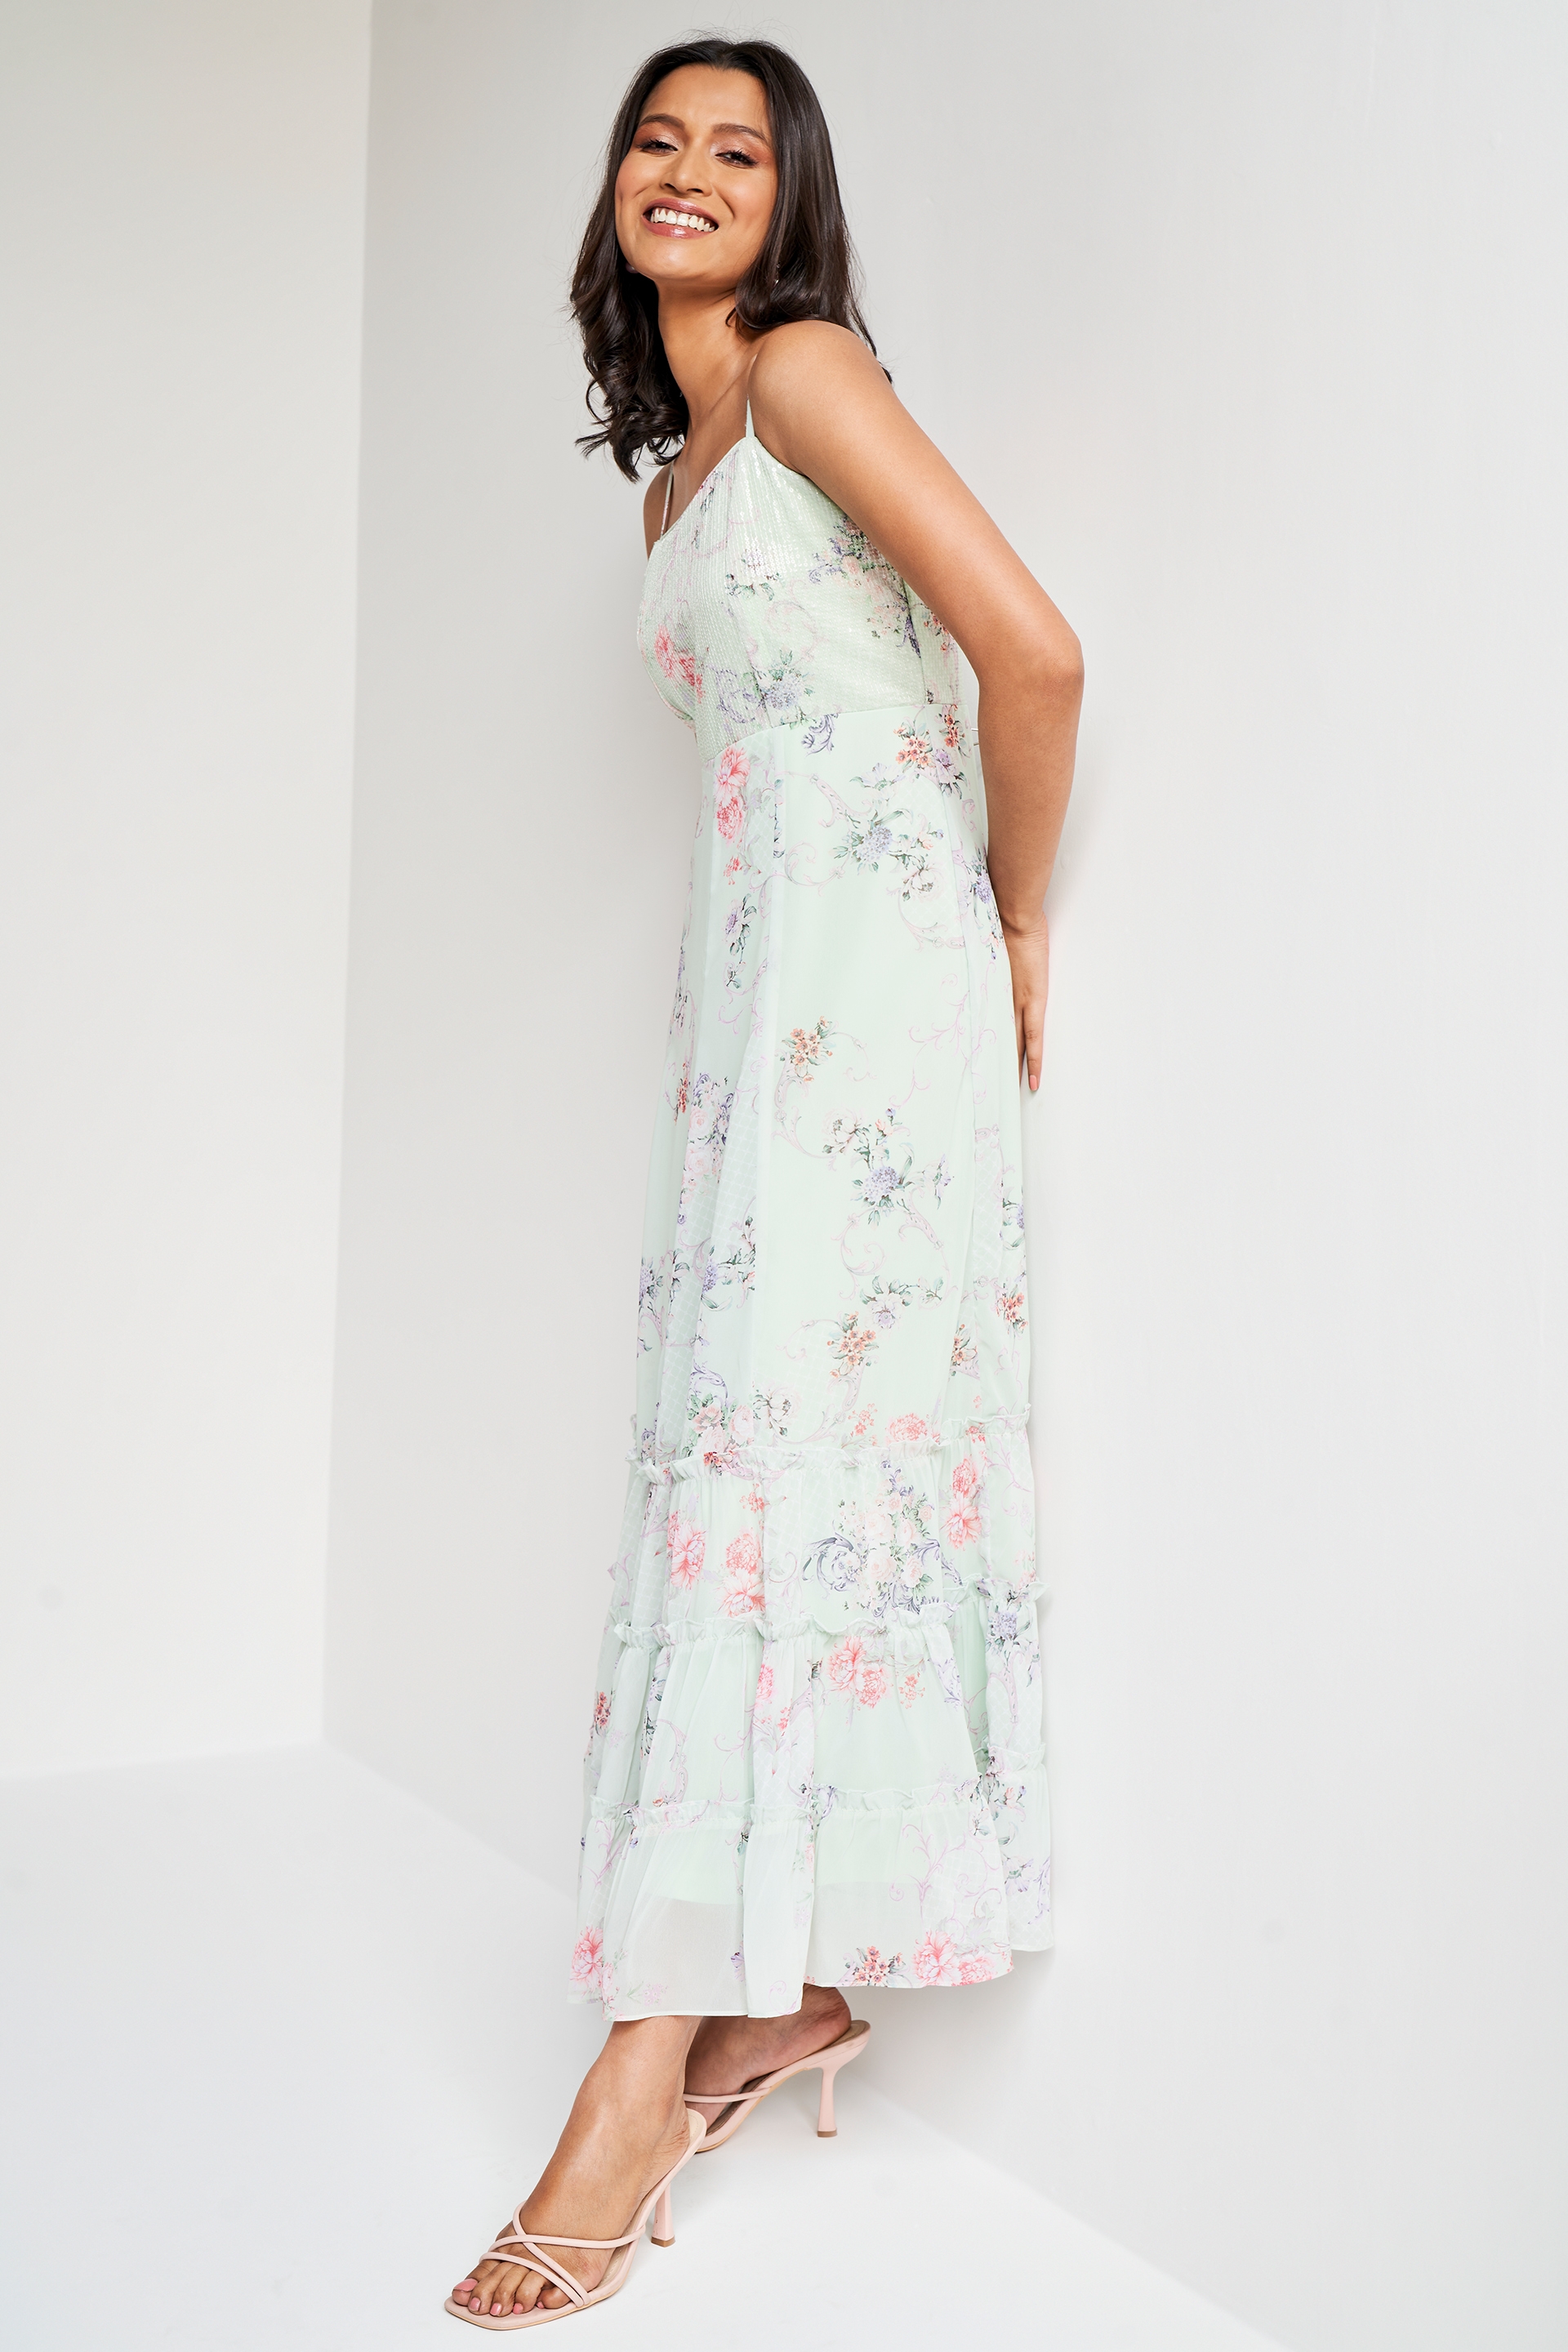 AND Evening Floral Mint Gown